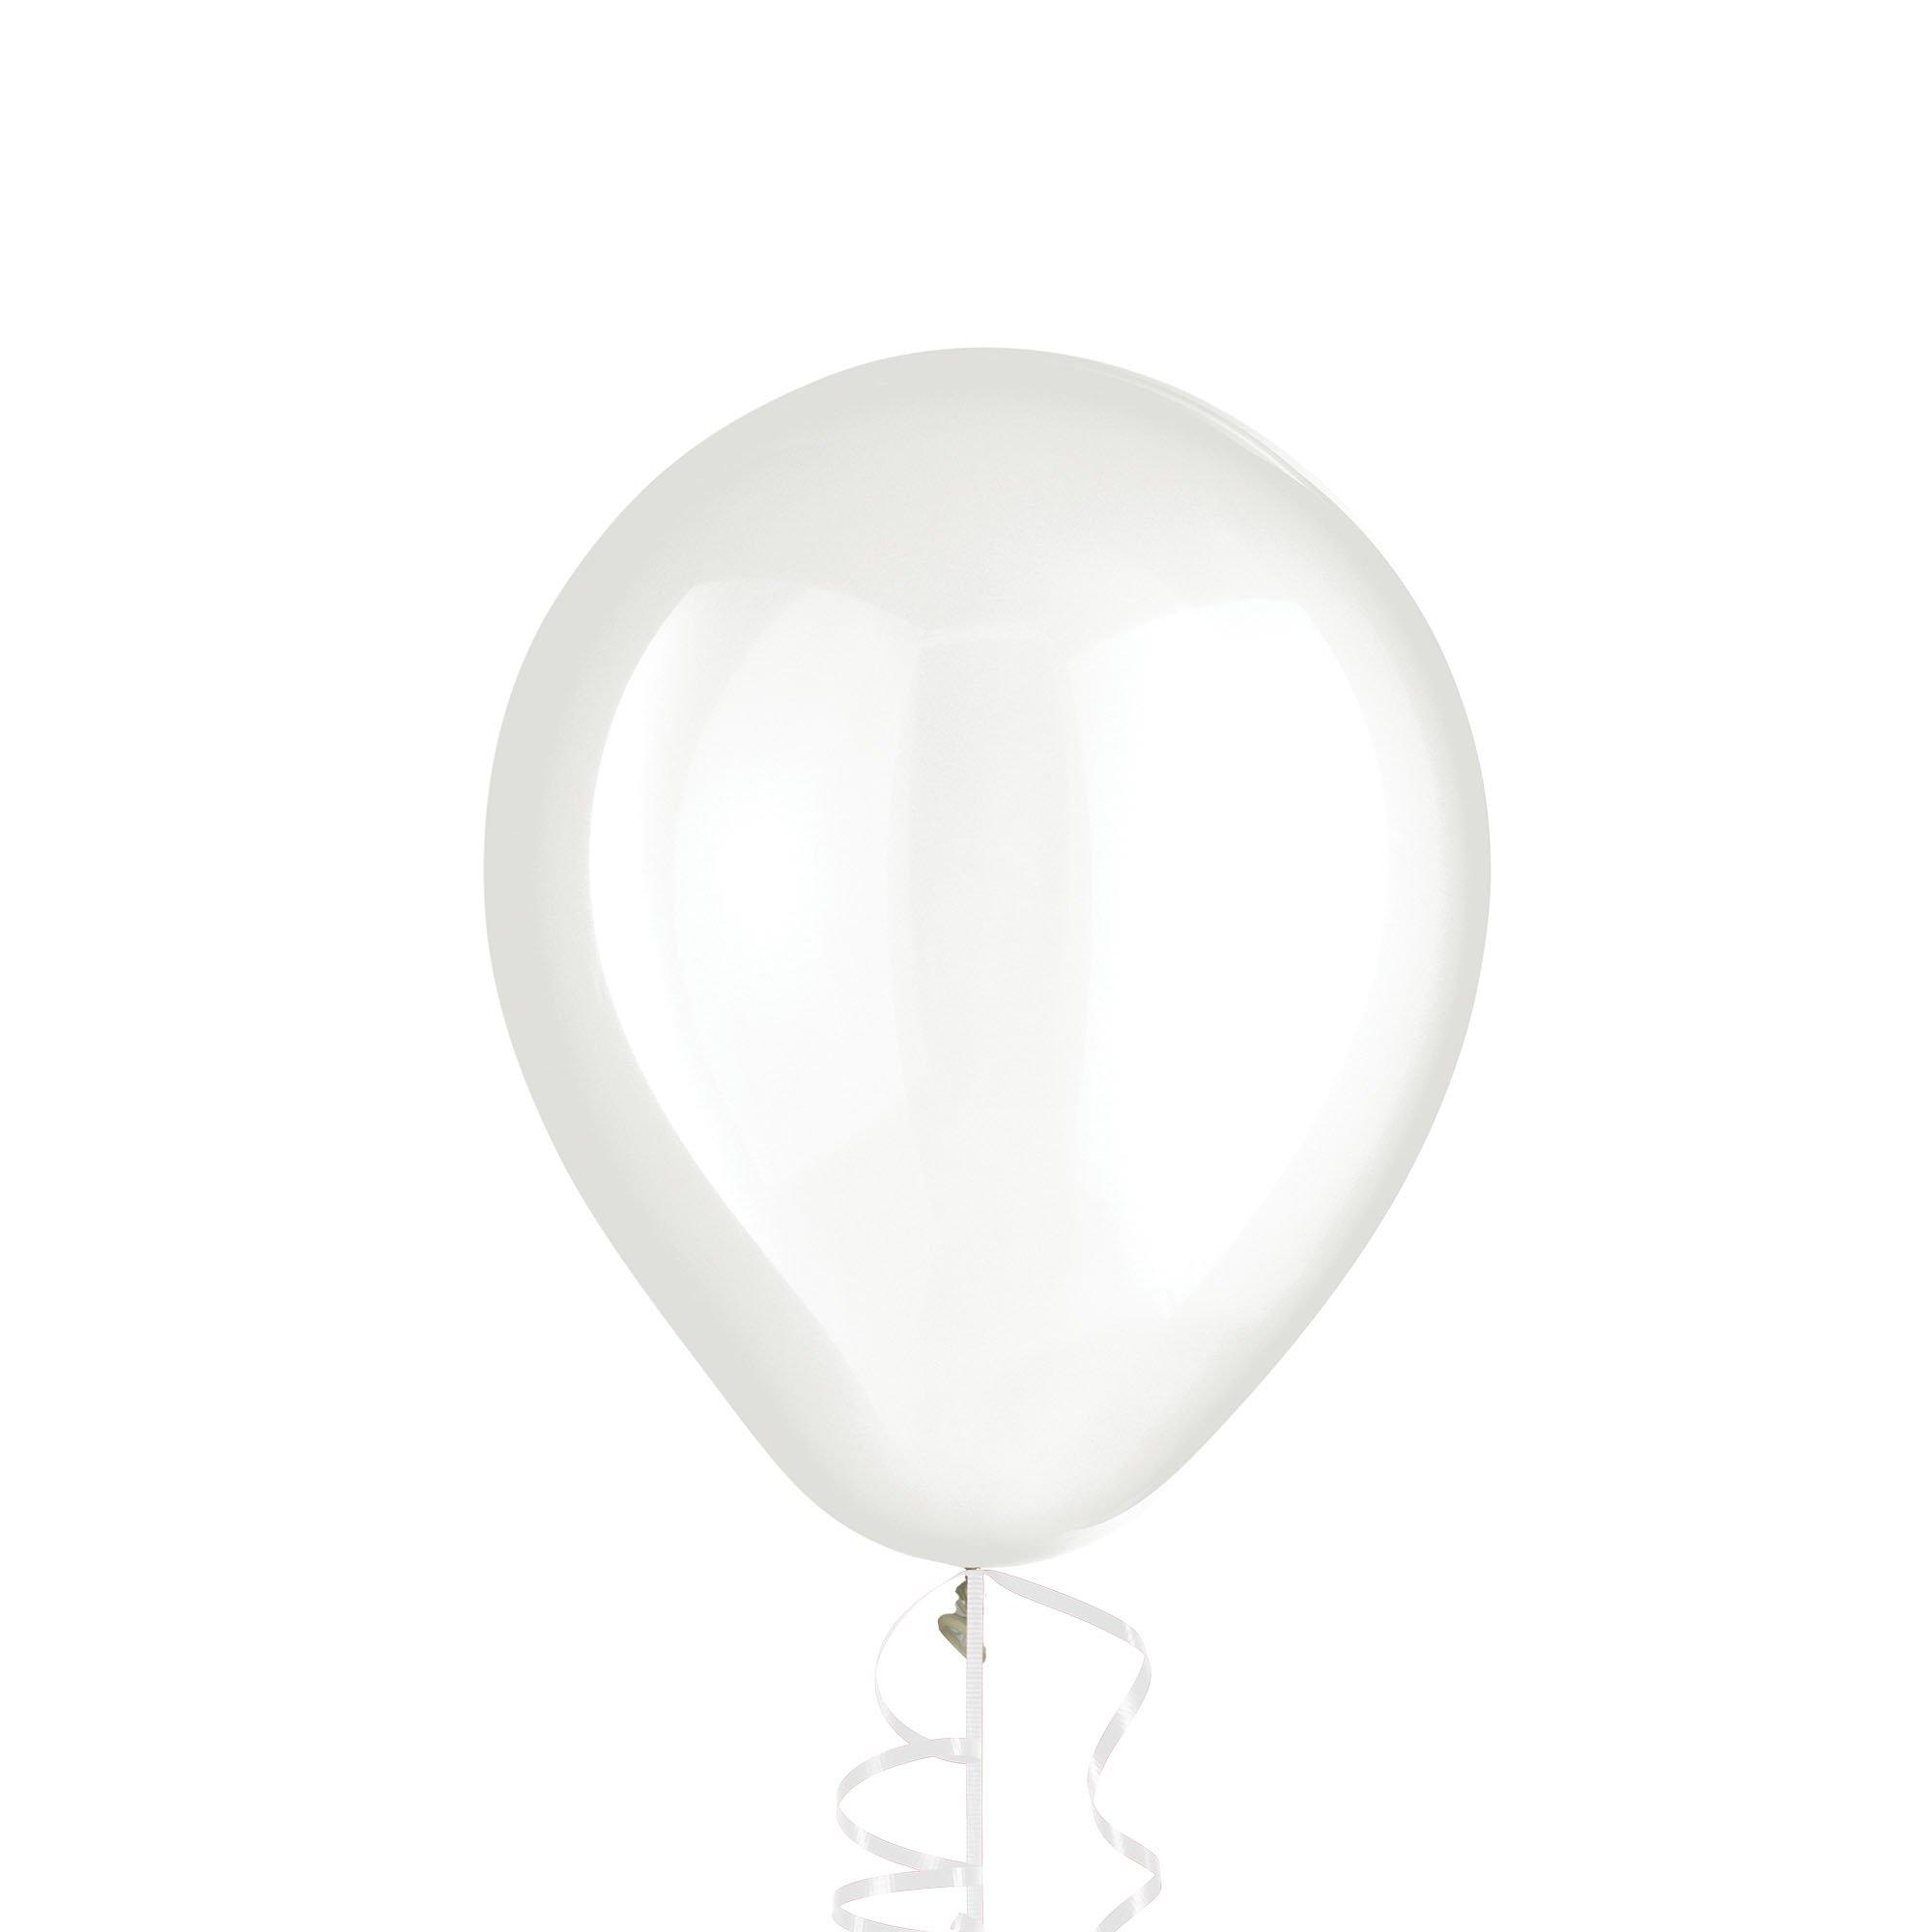 How transparent are clear latex balloons? : Bargain Balloons